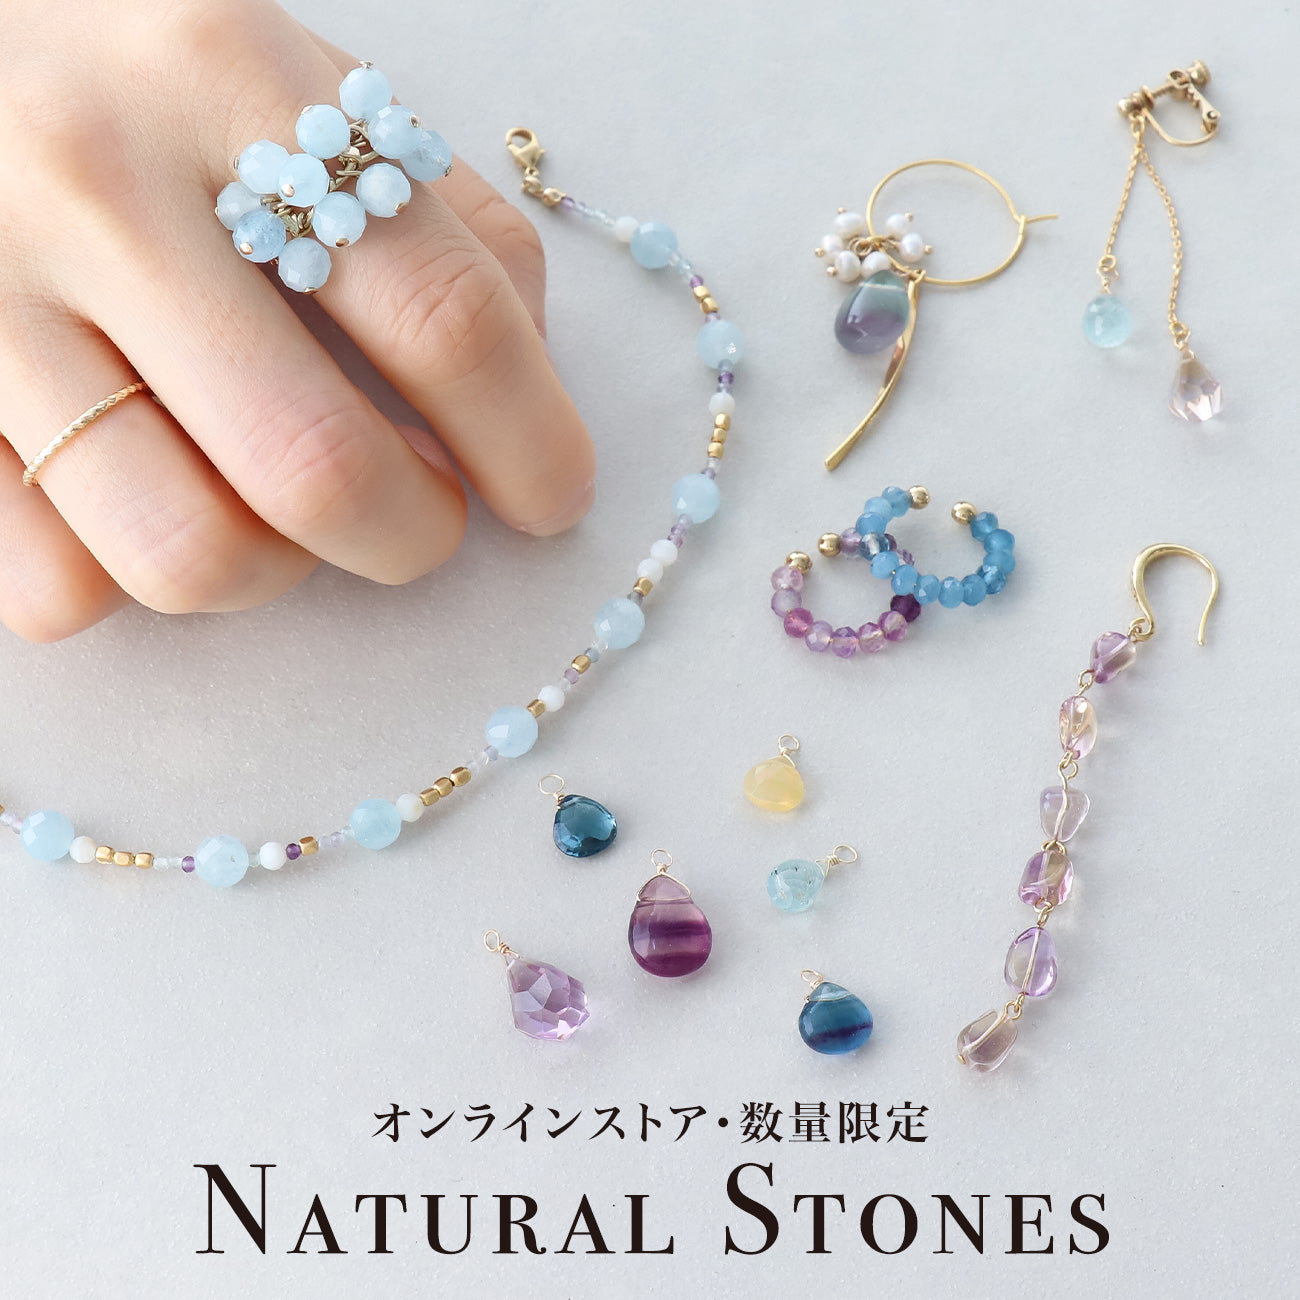 Only online store! We have prepared popular natural stones